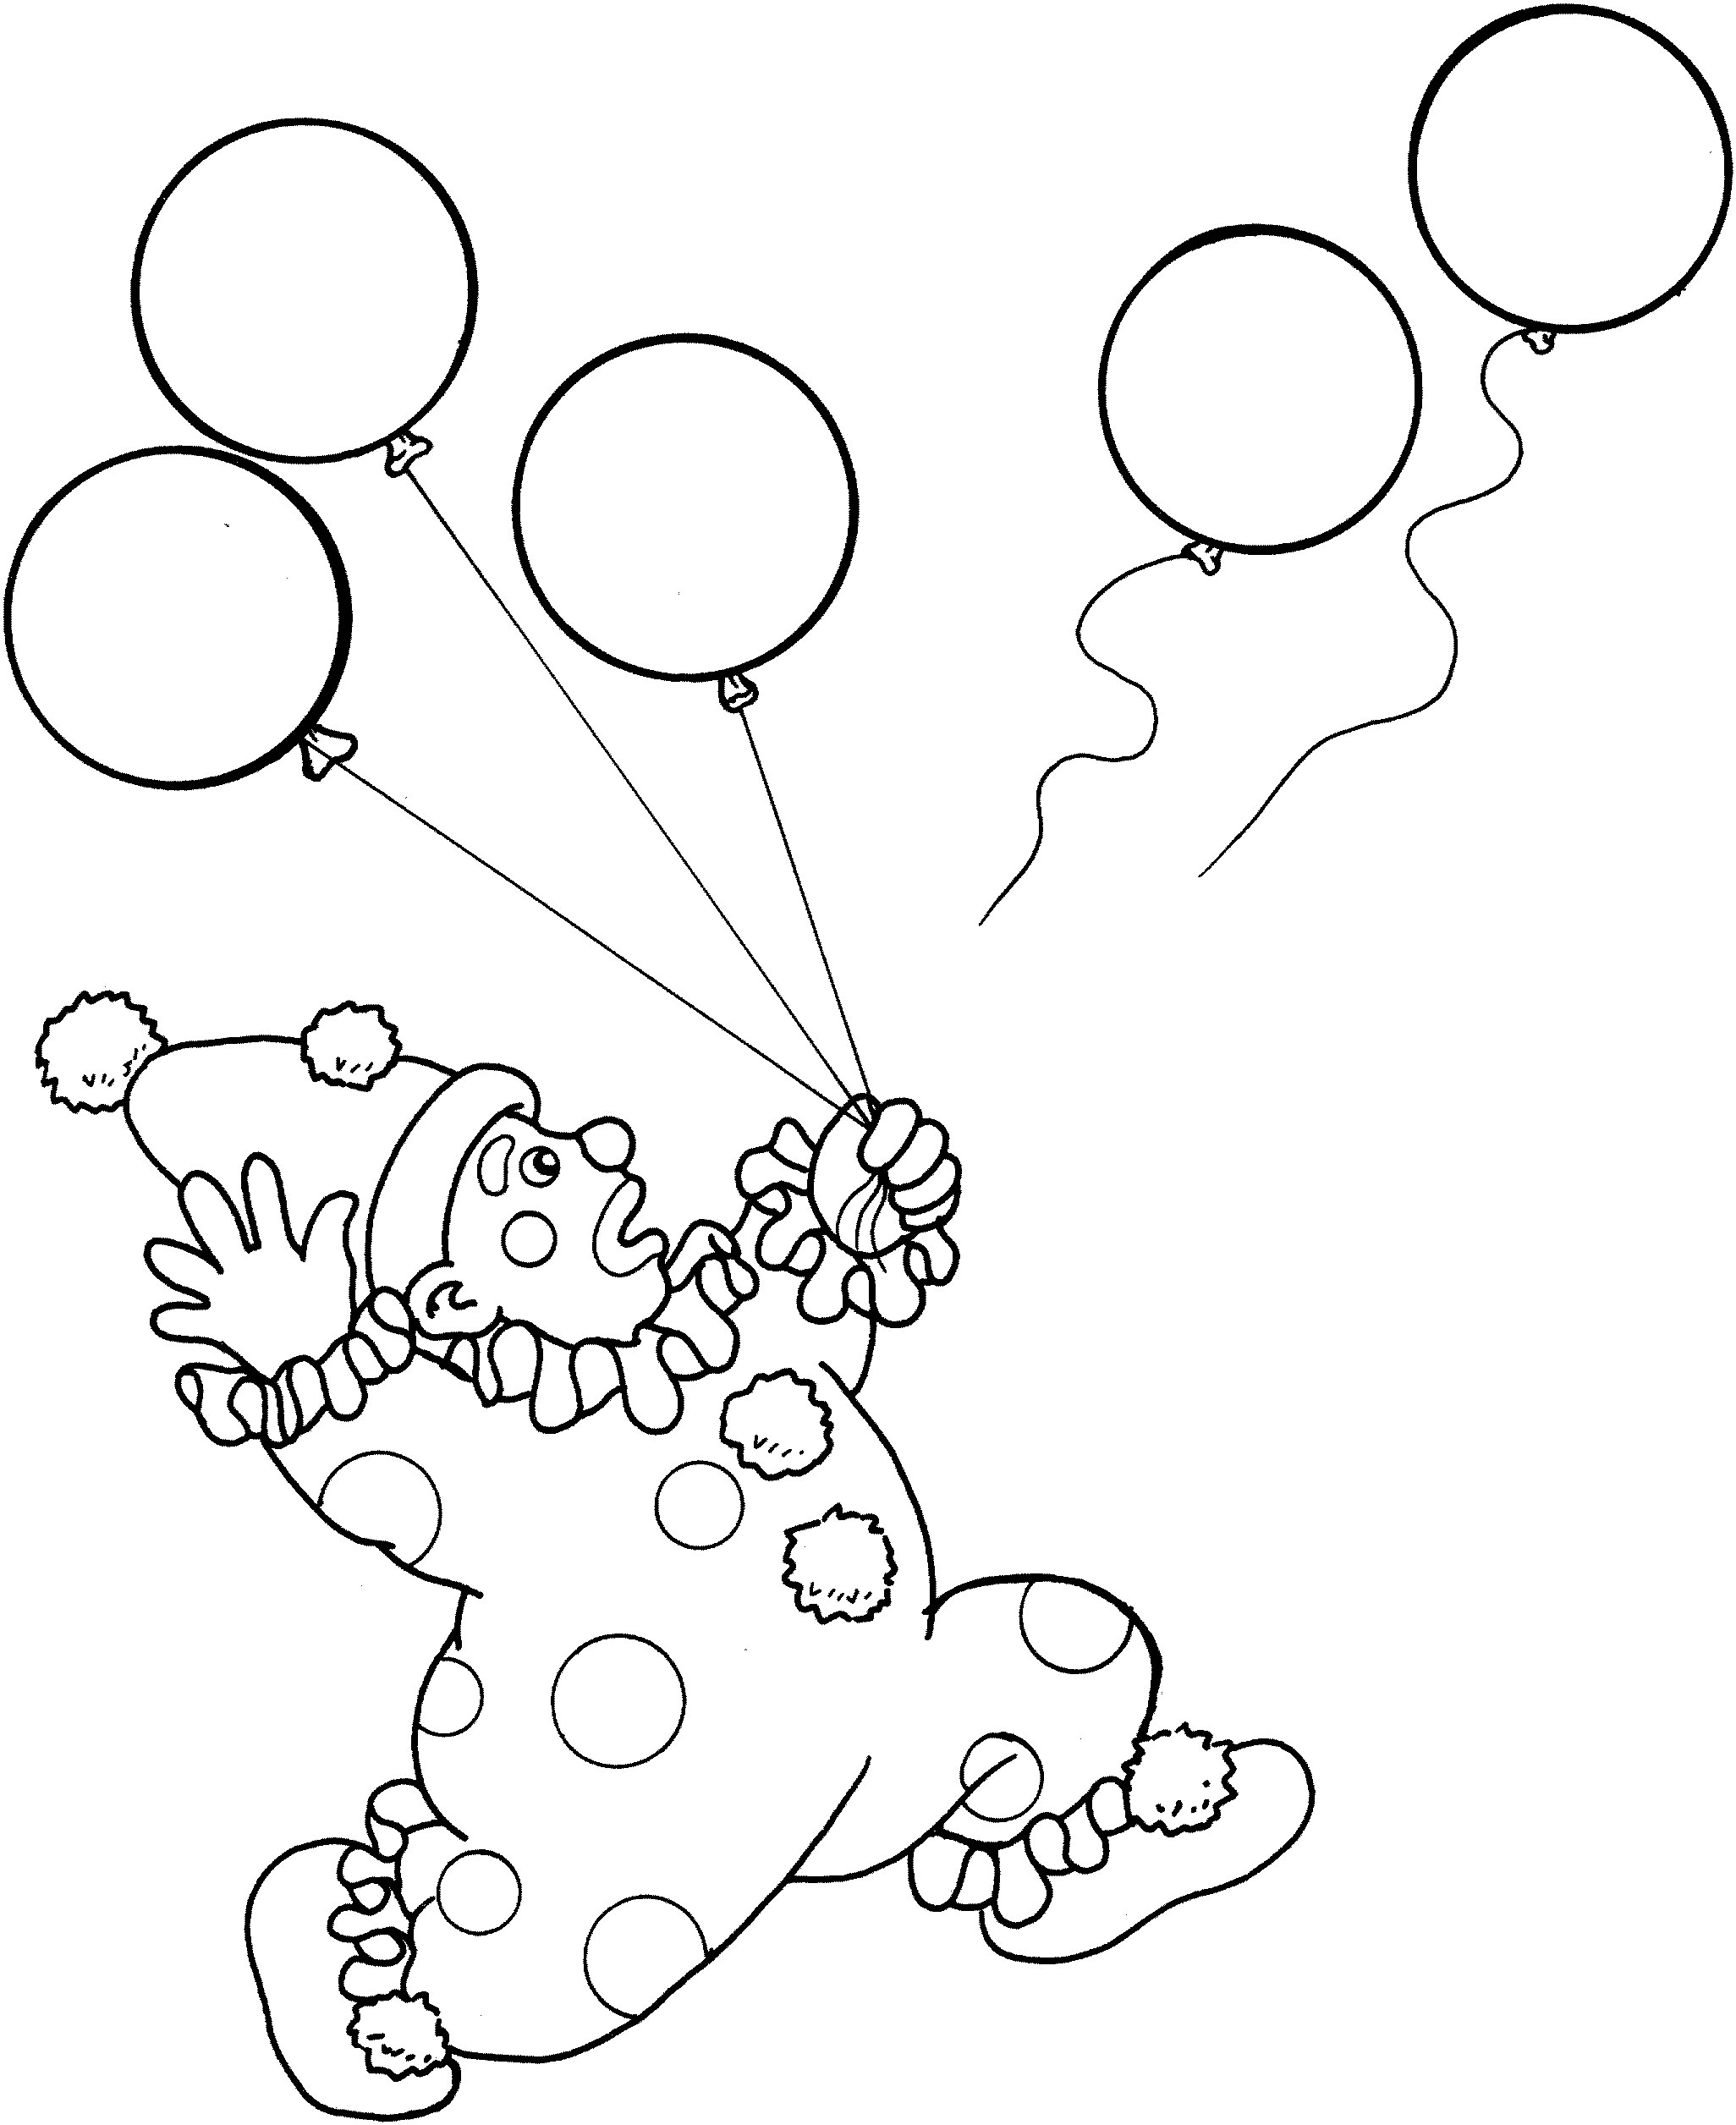 balloons coloring page